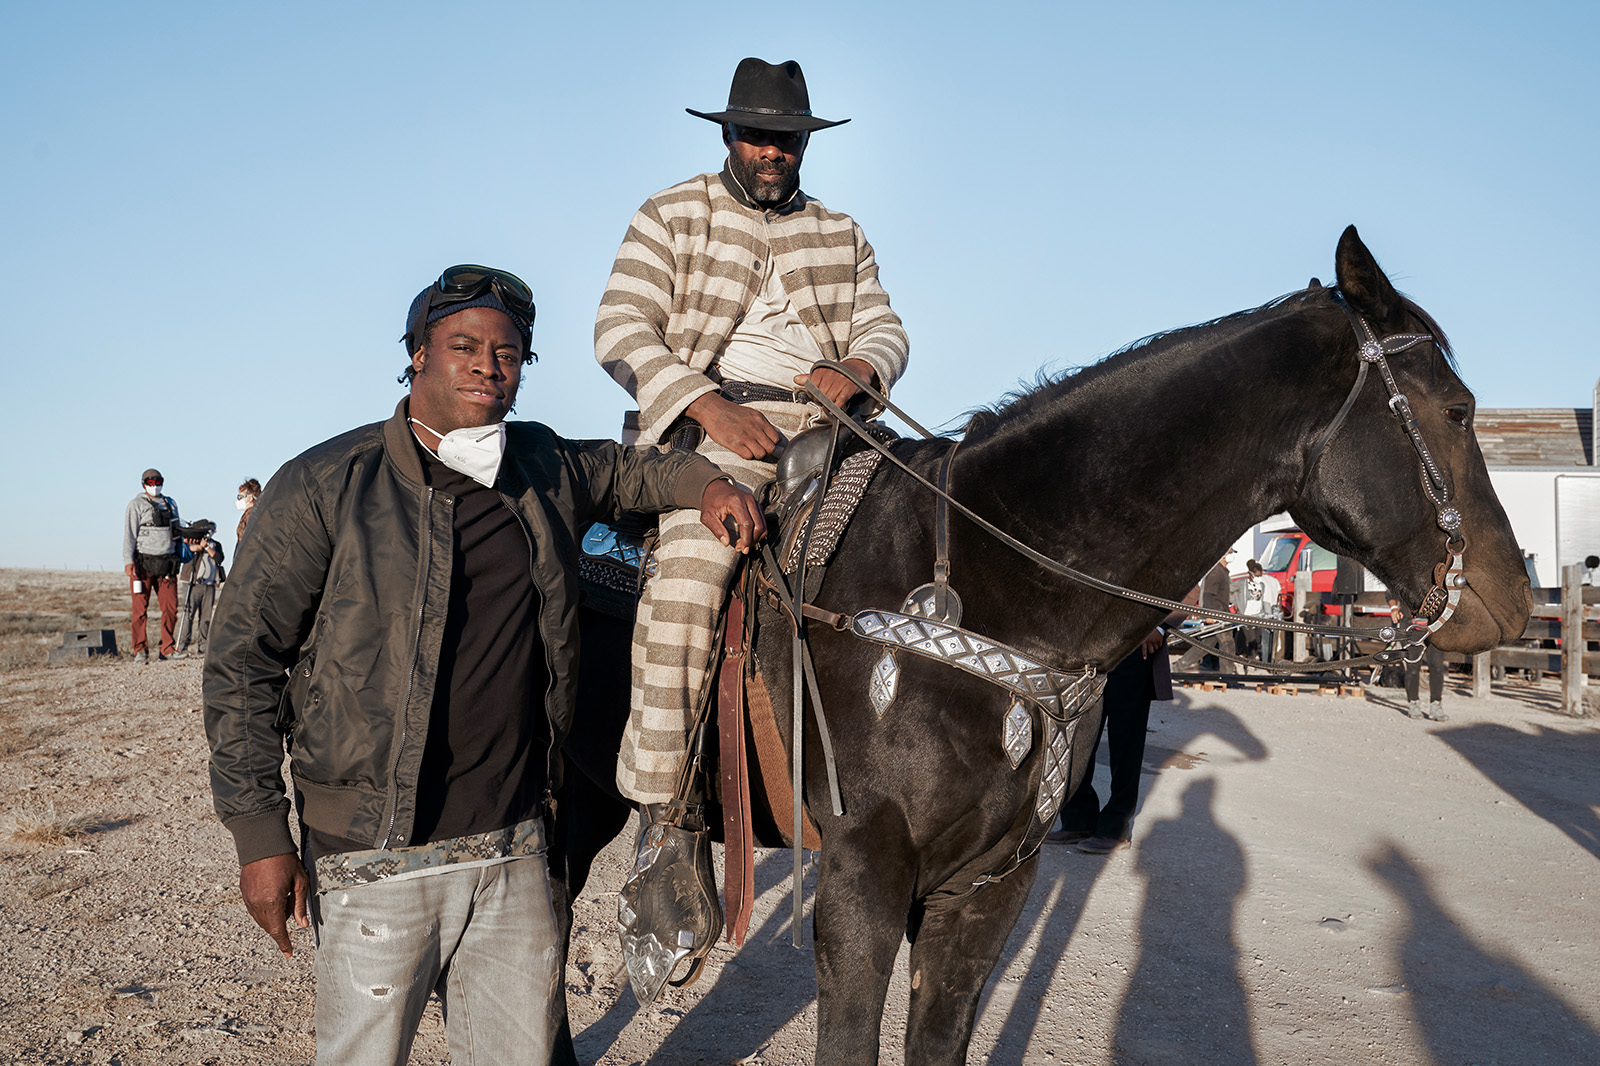 Jeymes Samuel with Idris Elba and uncredited horse in The Harder They Fall. Image © Netflix